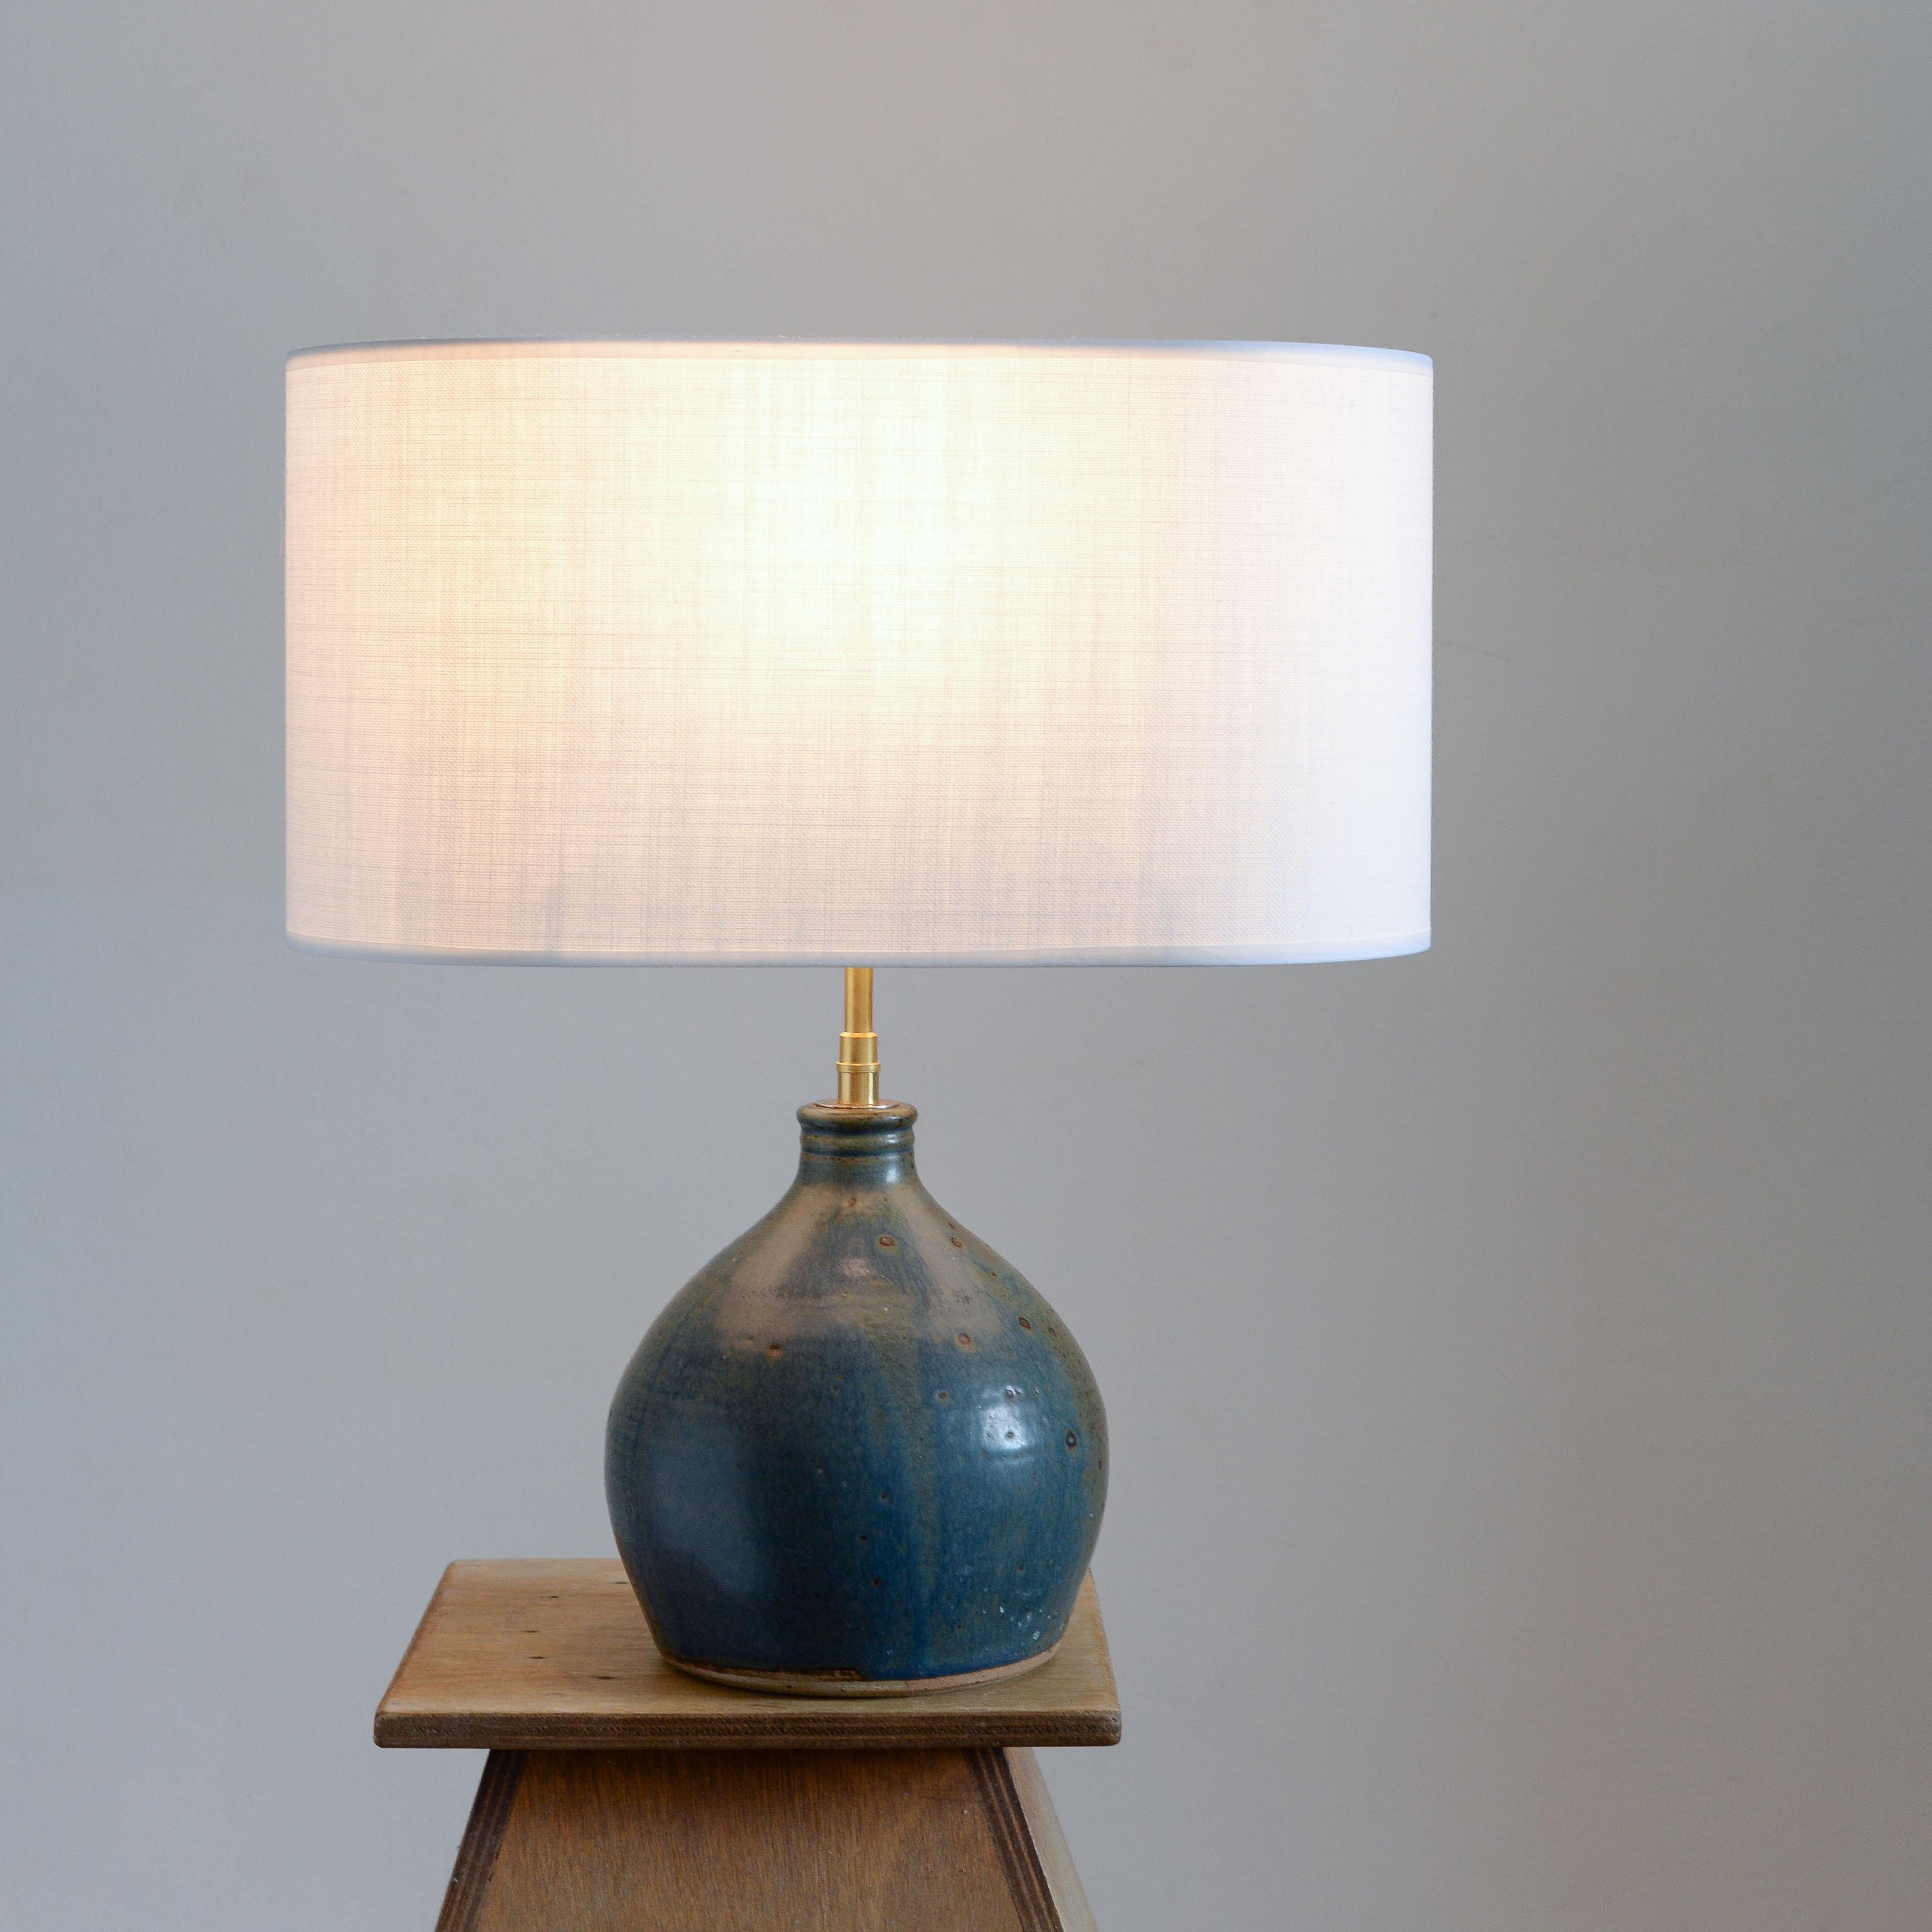 Blue Sandstone Table Lamp Mid-Century Modern

This lamp base from the 1960s is a French artisanal work made of sandstone. Its surface is covered in a blue pyrite enamel, creating a unique effect of small spots of various sizes. This special enamel